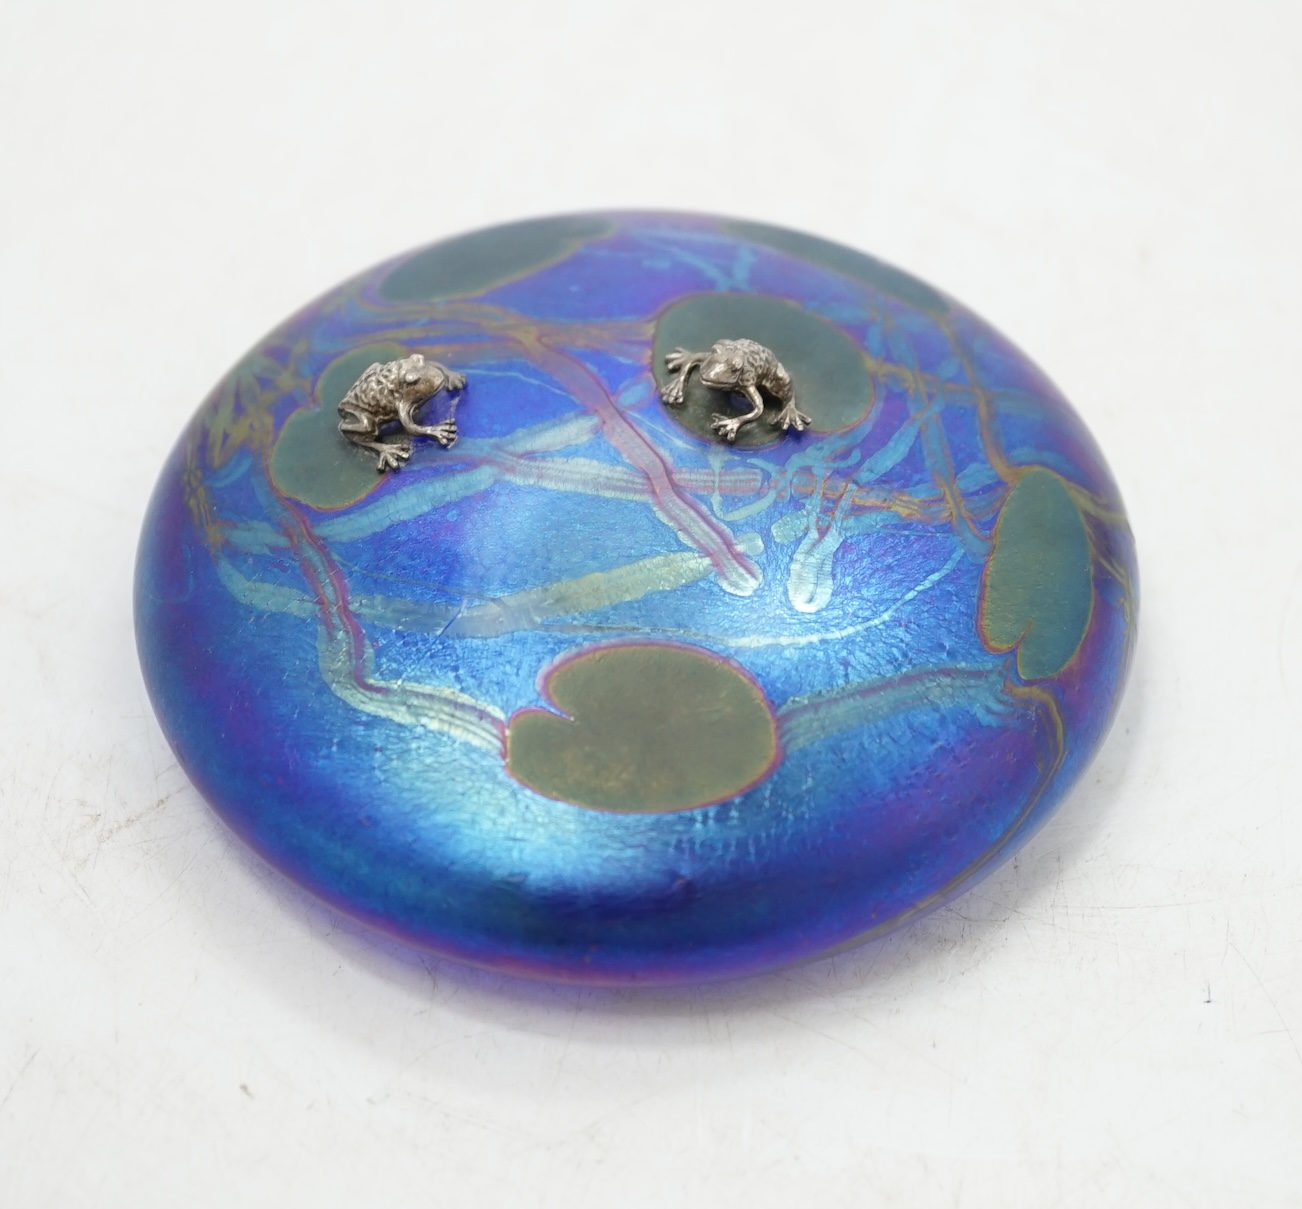 A John Ditchfield for Glasform disc shaped paperweight with mounted metal frogs on a lily pad, 10cm diameter. Condition - good